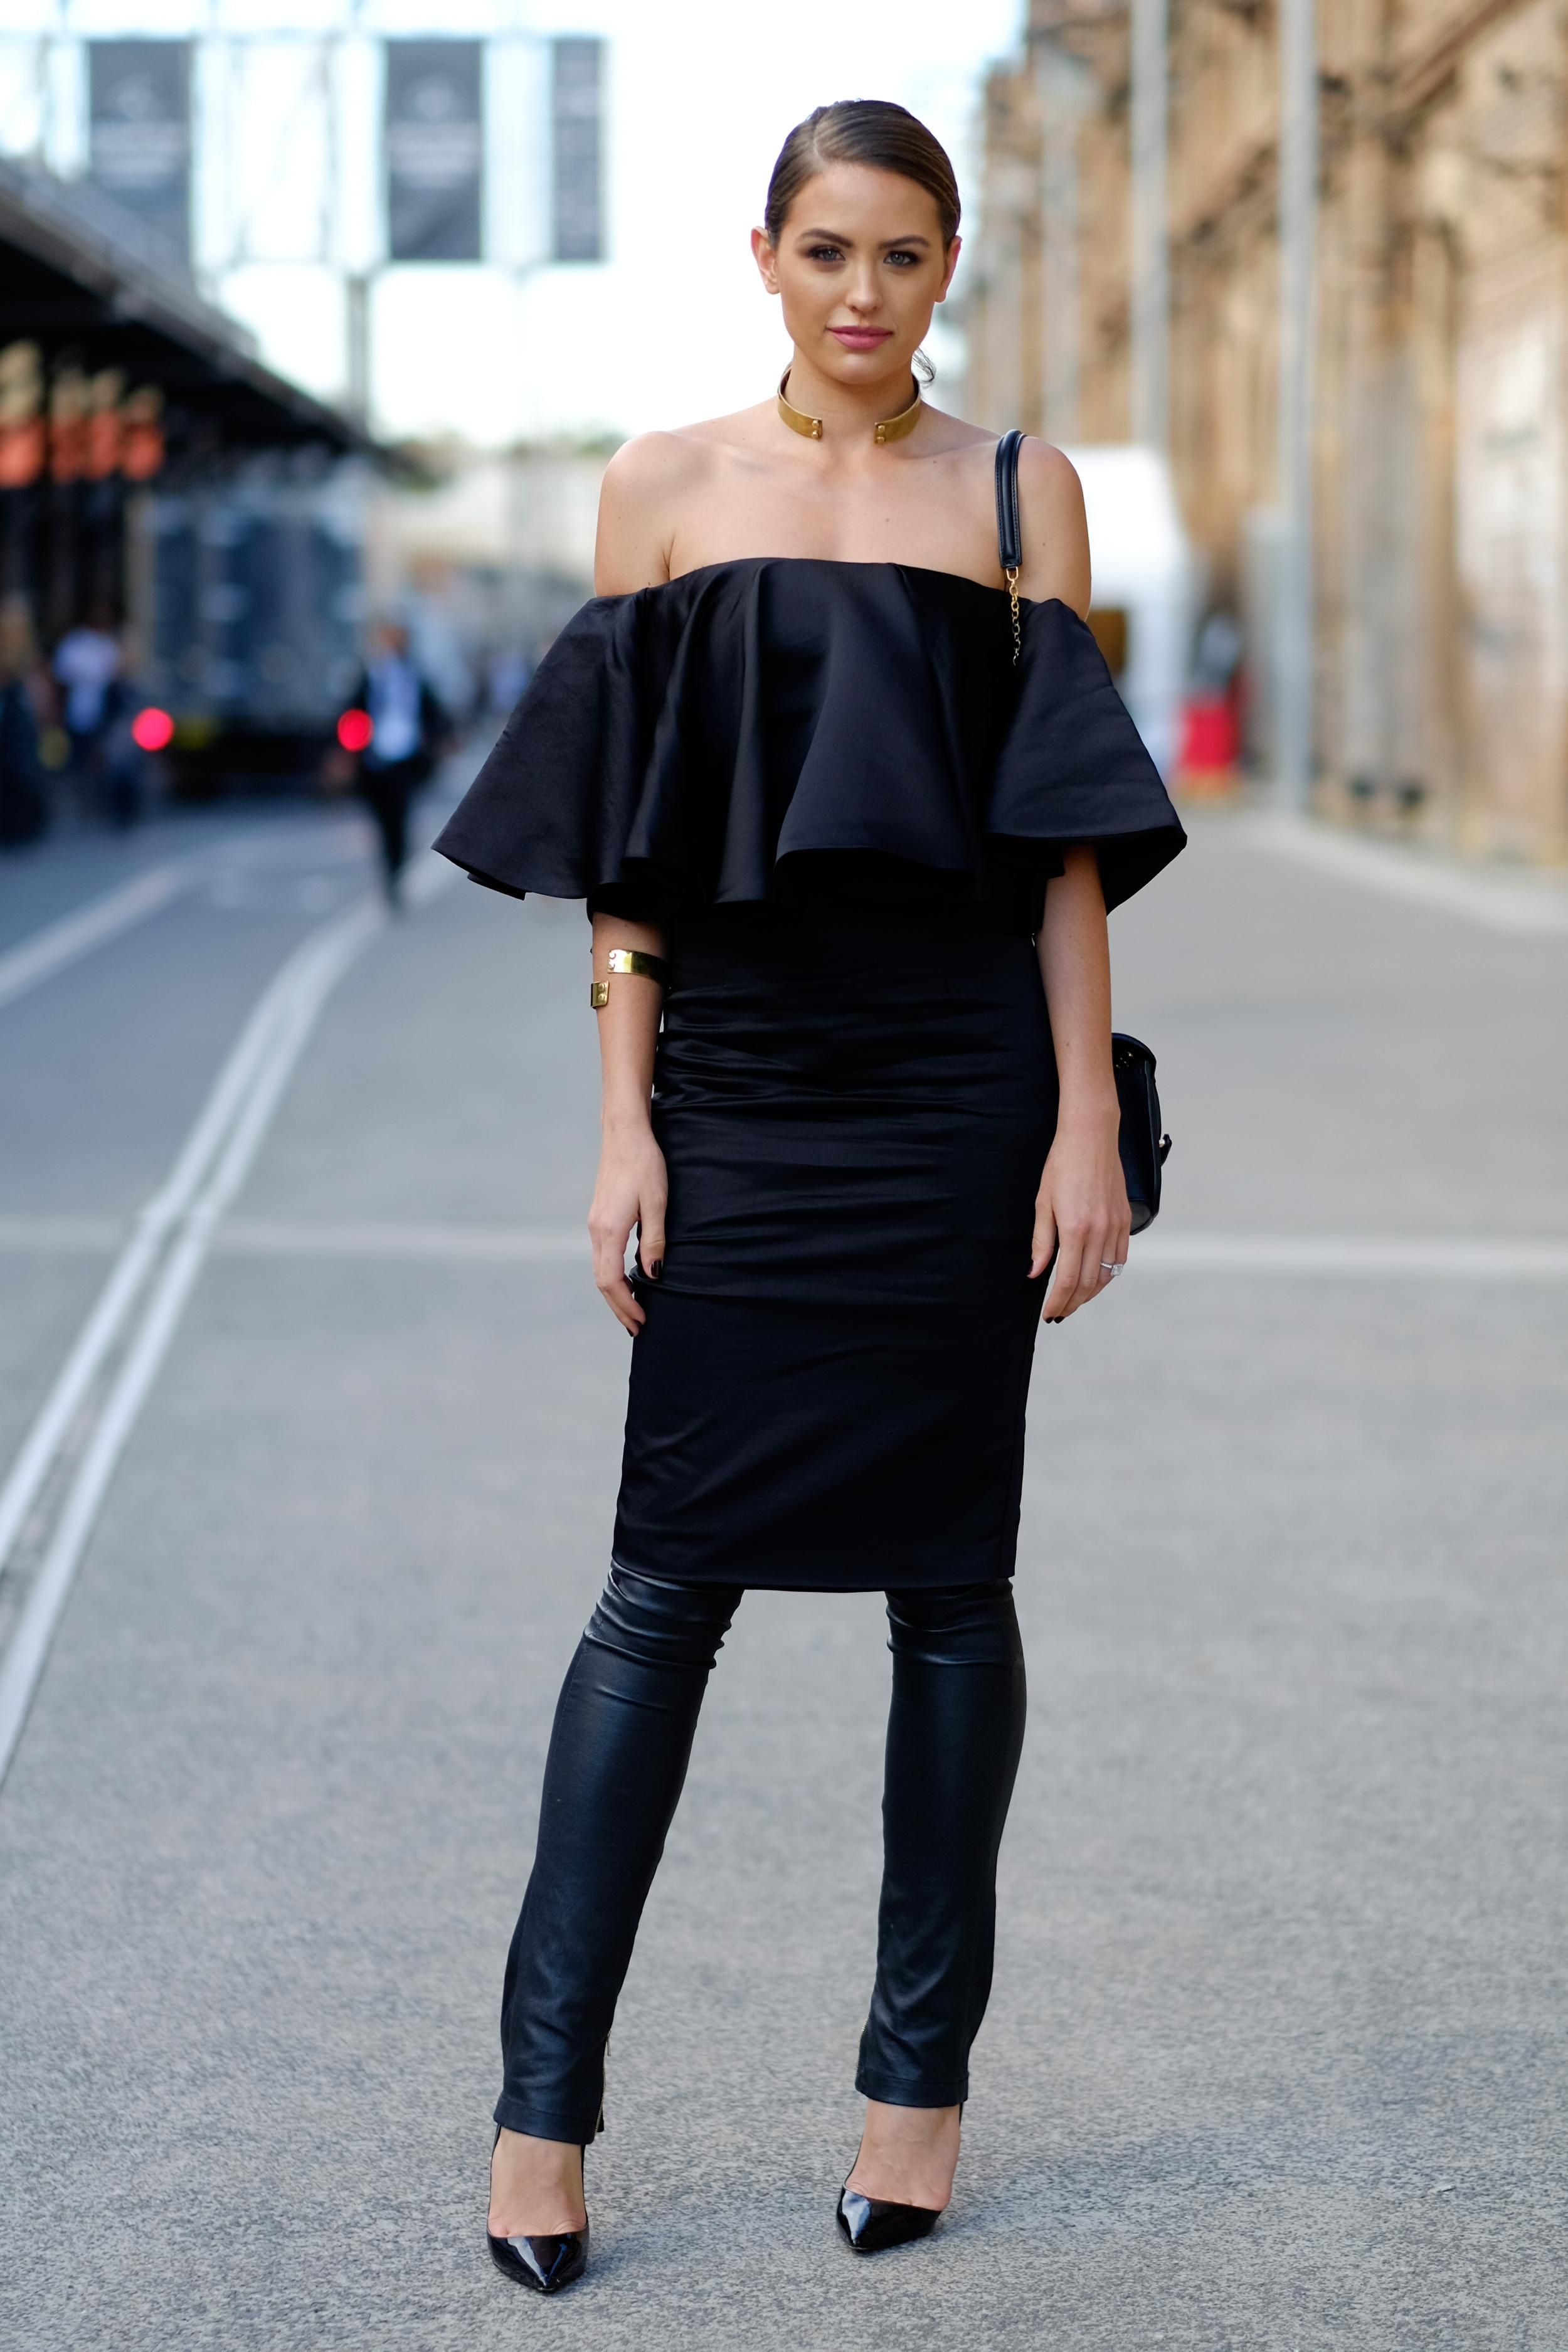 How to Layer a Skirt Over Pants or a Dress - off the shoulder feminine  ruffle dress layered over slim leather pants—gorgeous!